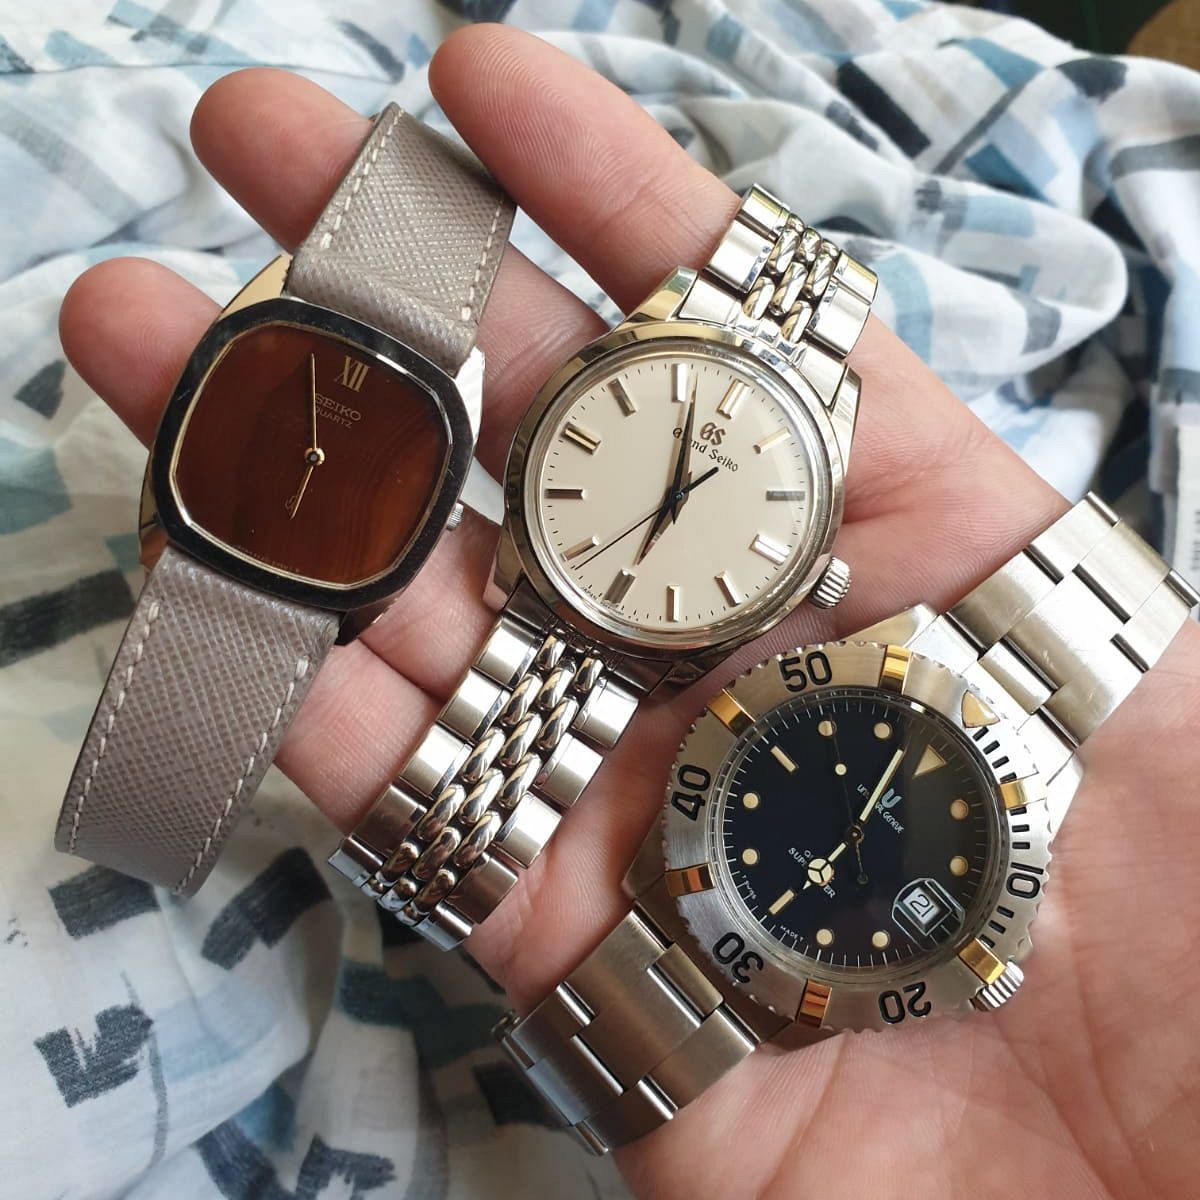 The three watches Nick wore most in 2020: Grand Seiko, Seiko and Universal Geneve